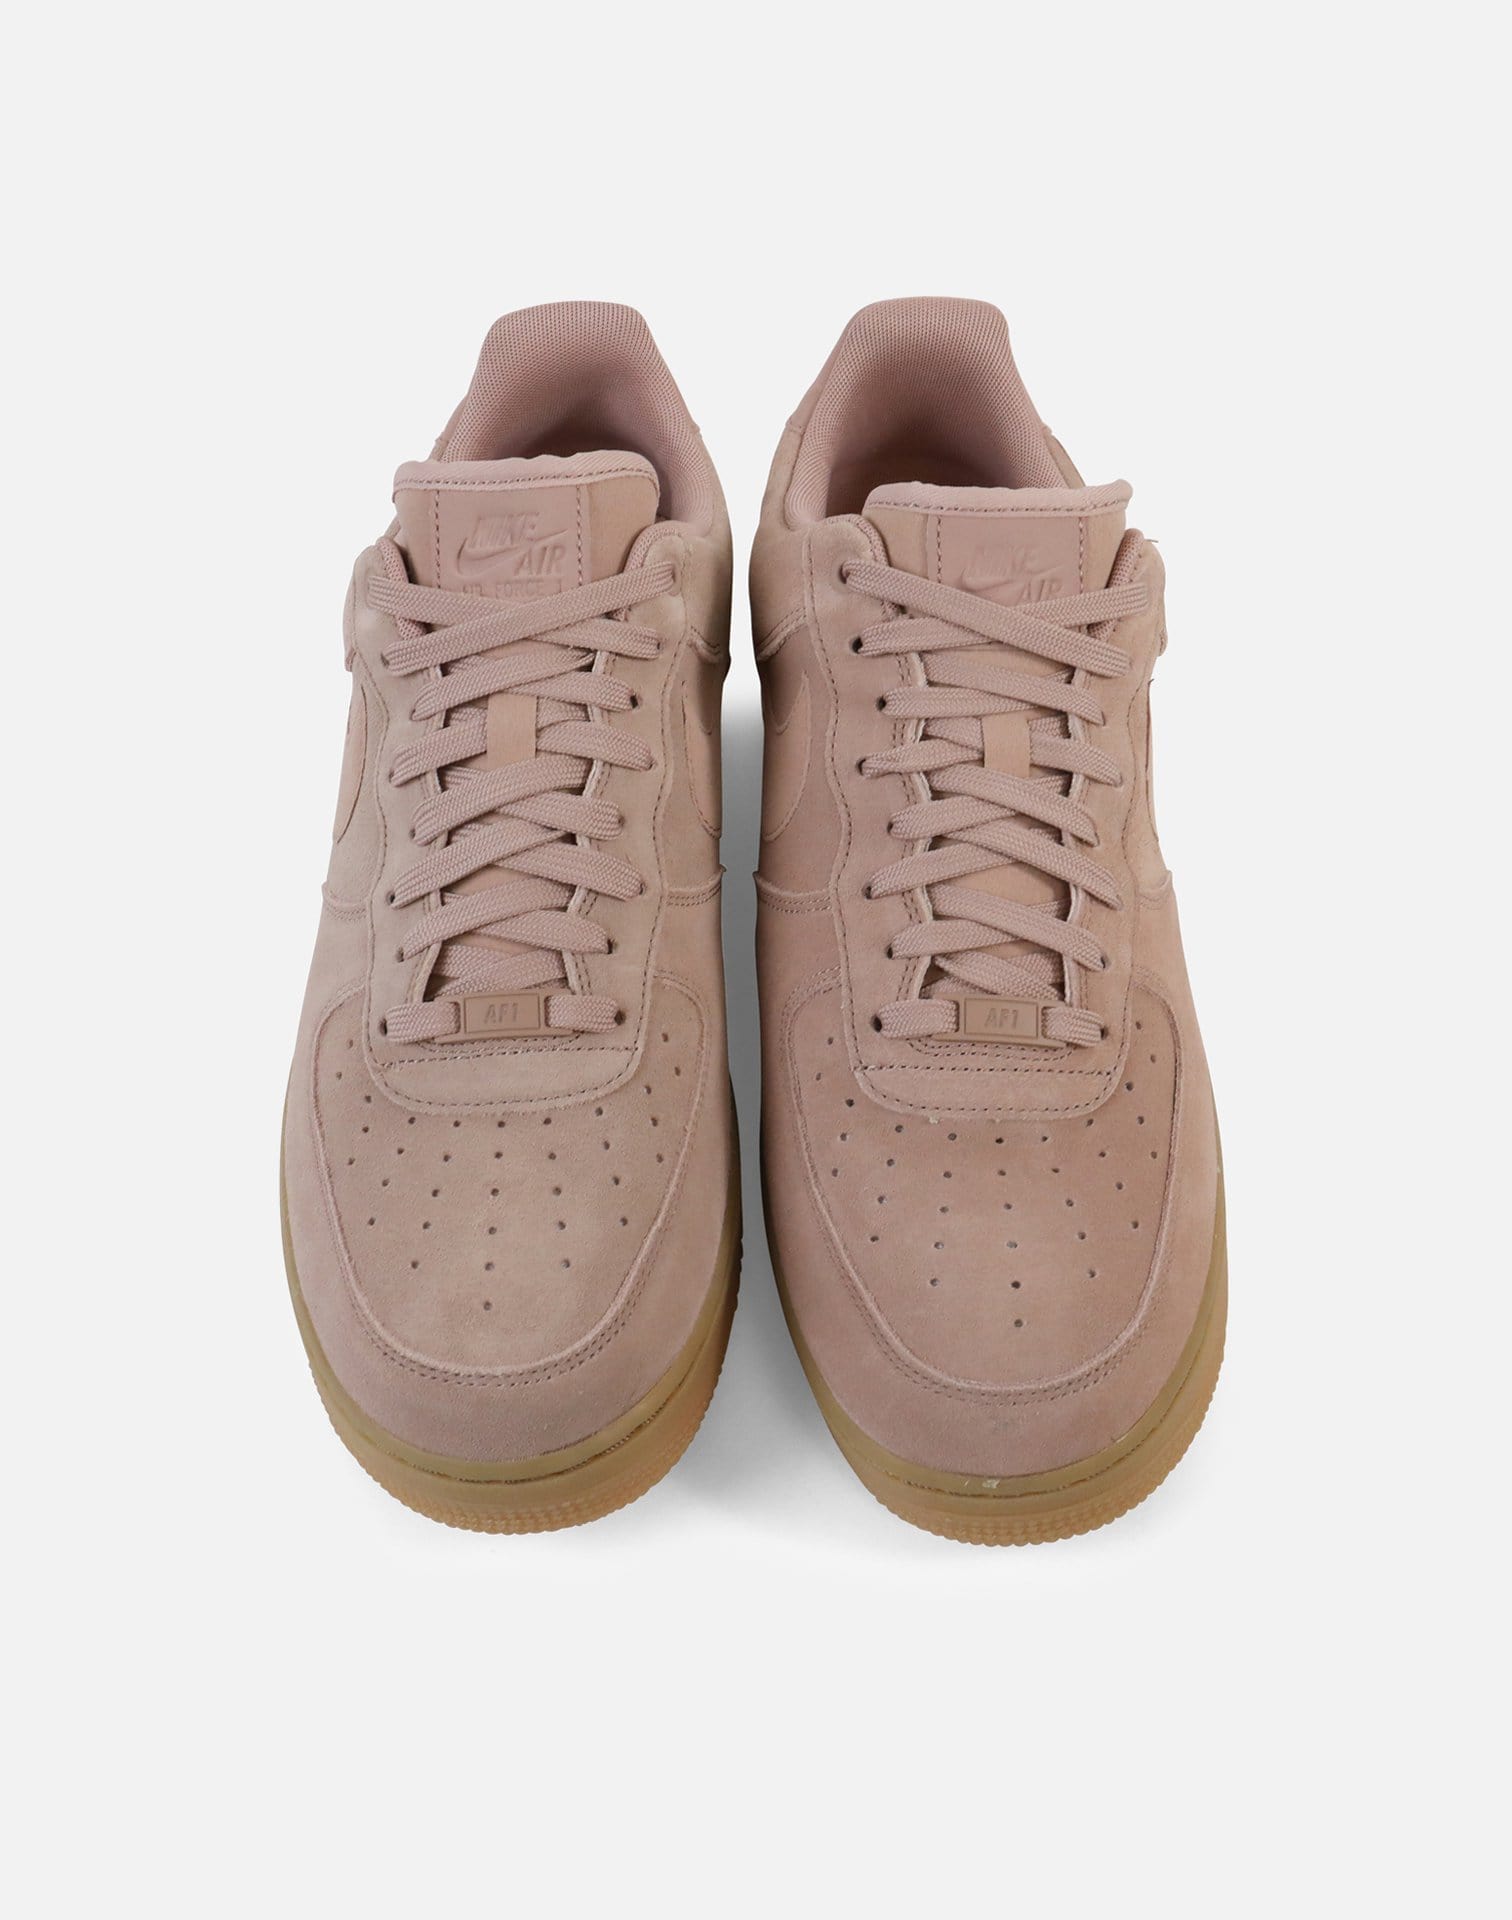 air force 1 07 lv8 suede particle pink